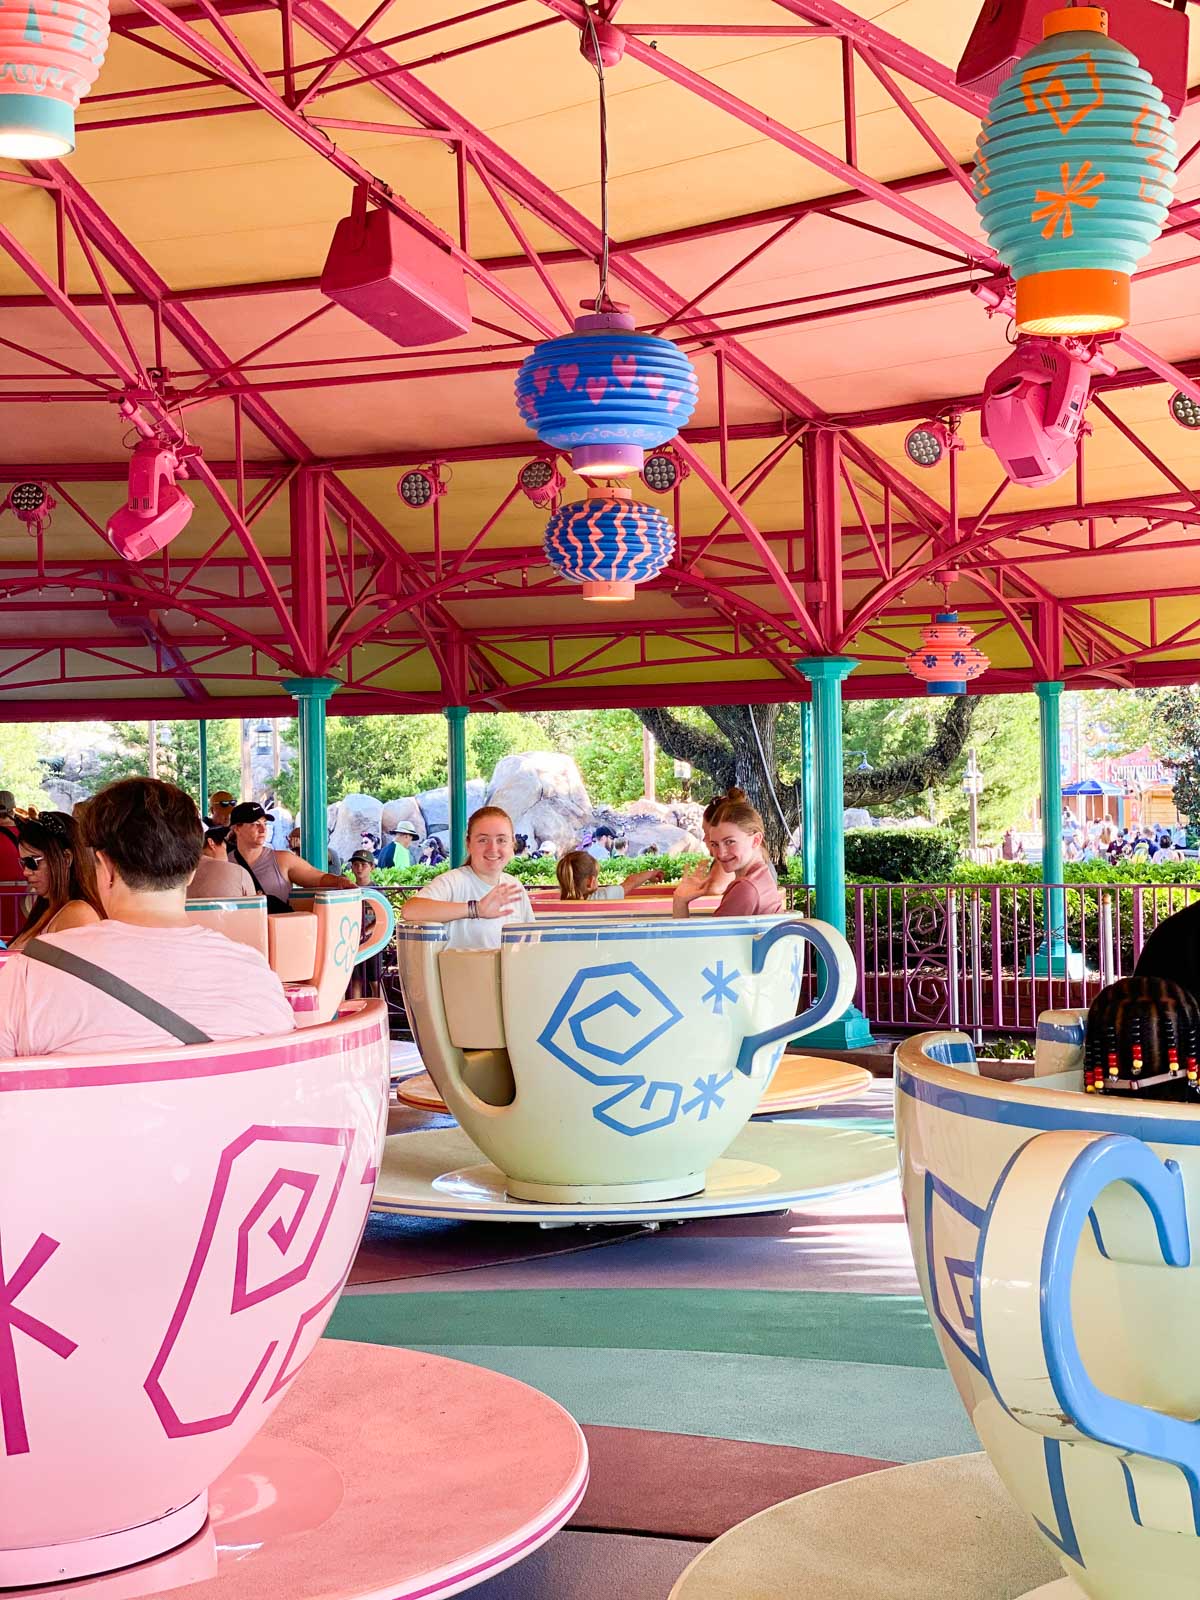 Two girls spin inside a tea cup on the ride.